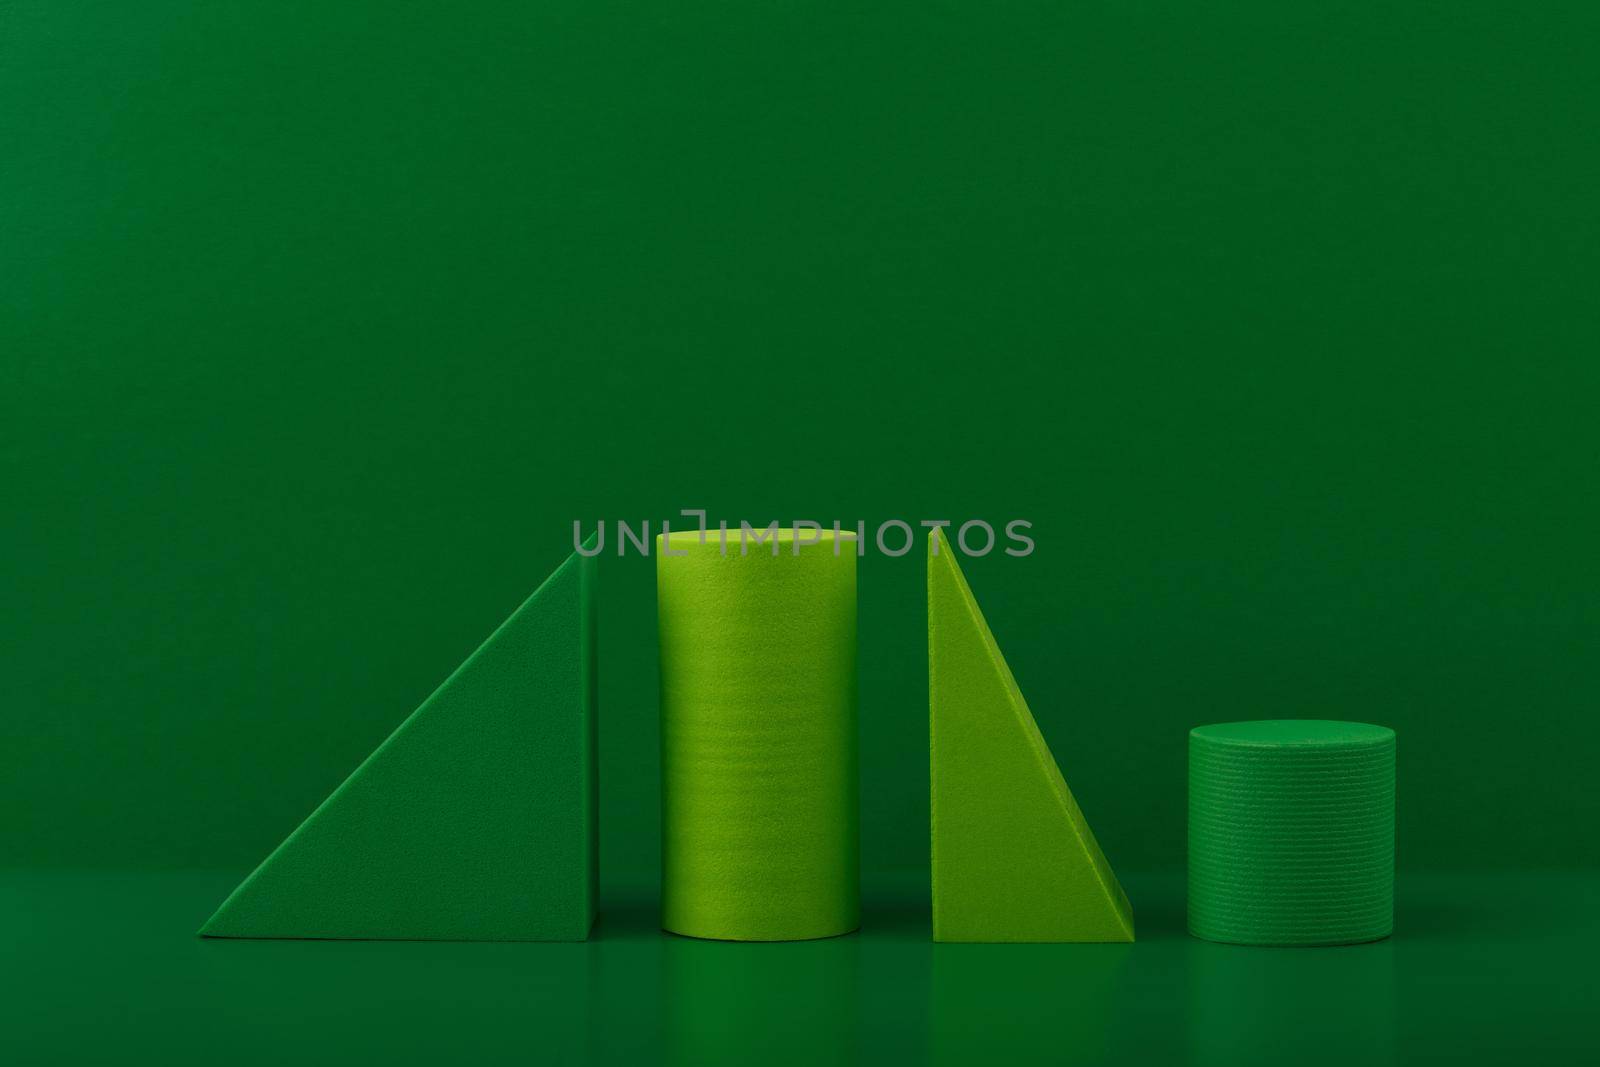 Abstract still life with light and dark green geometric figures triangles and cylinders against green background. 